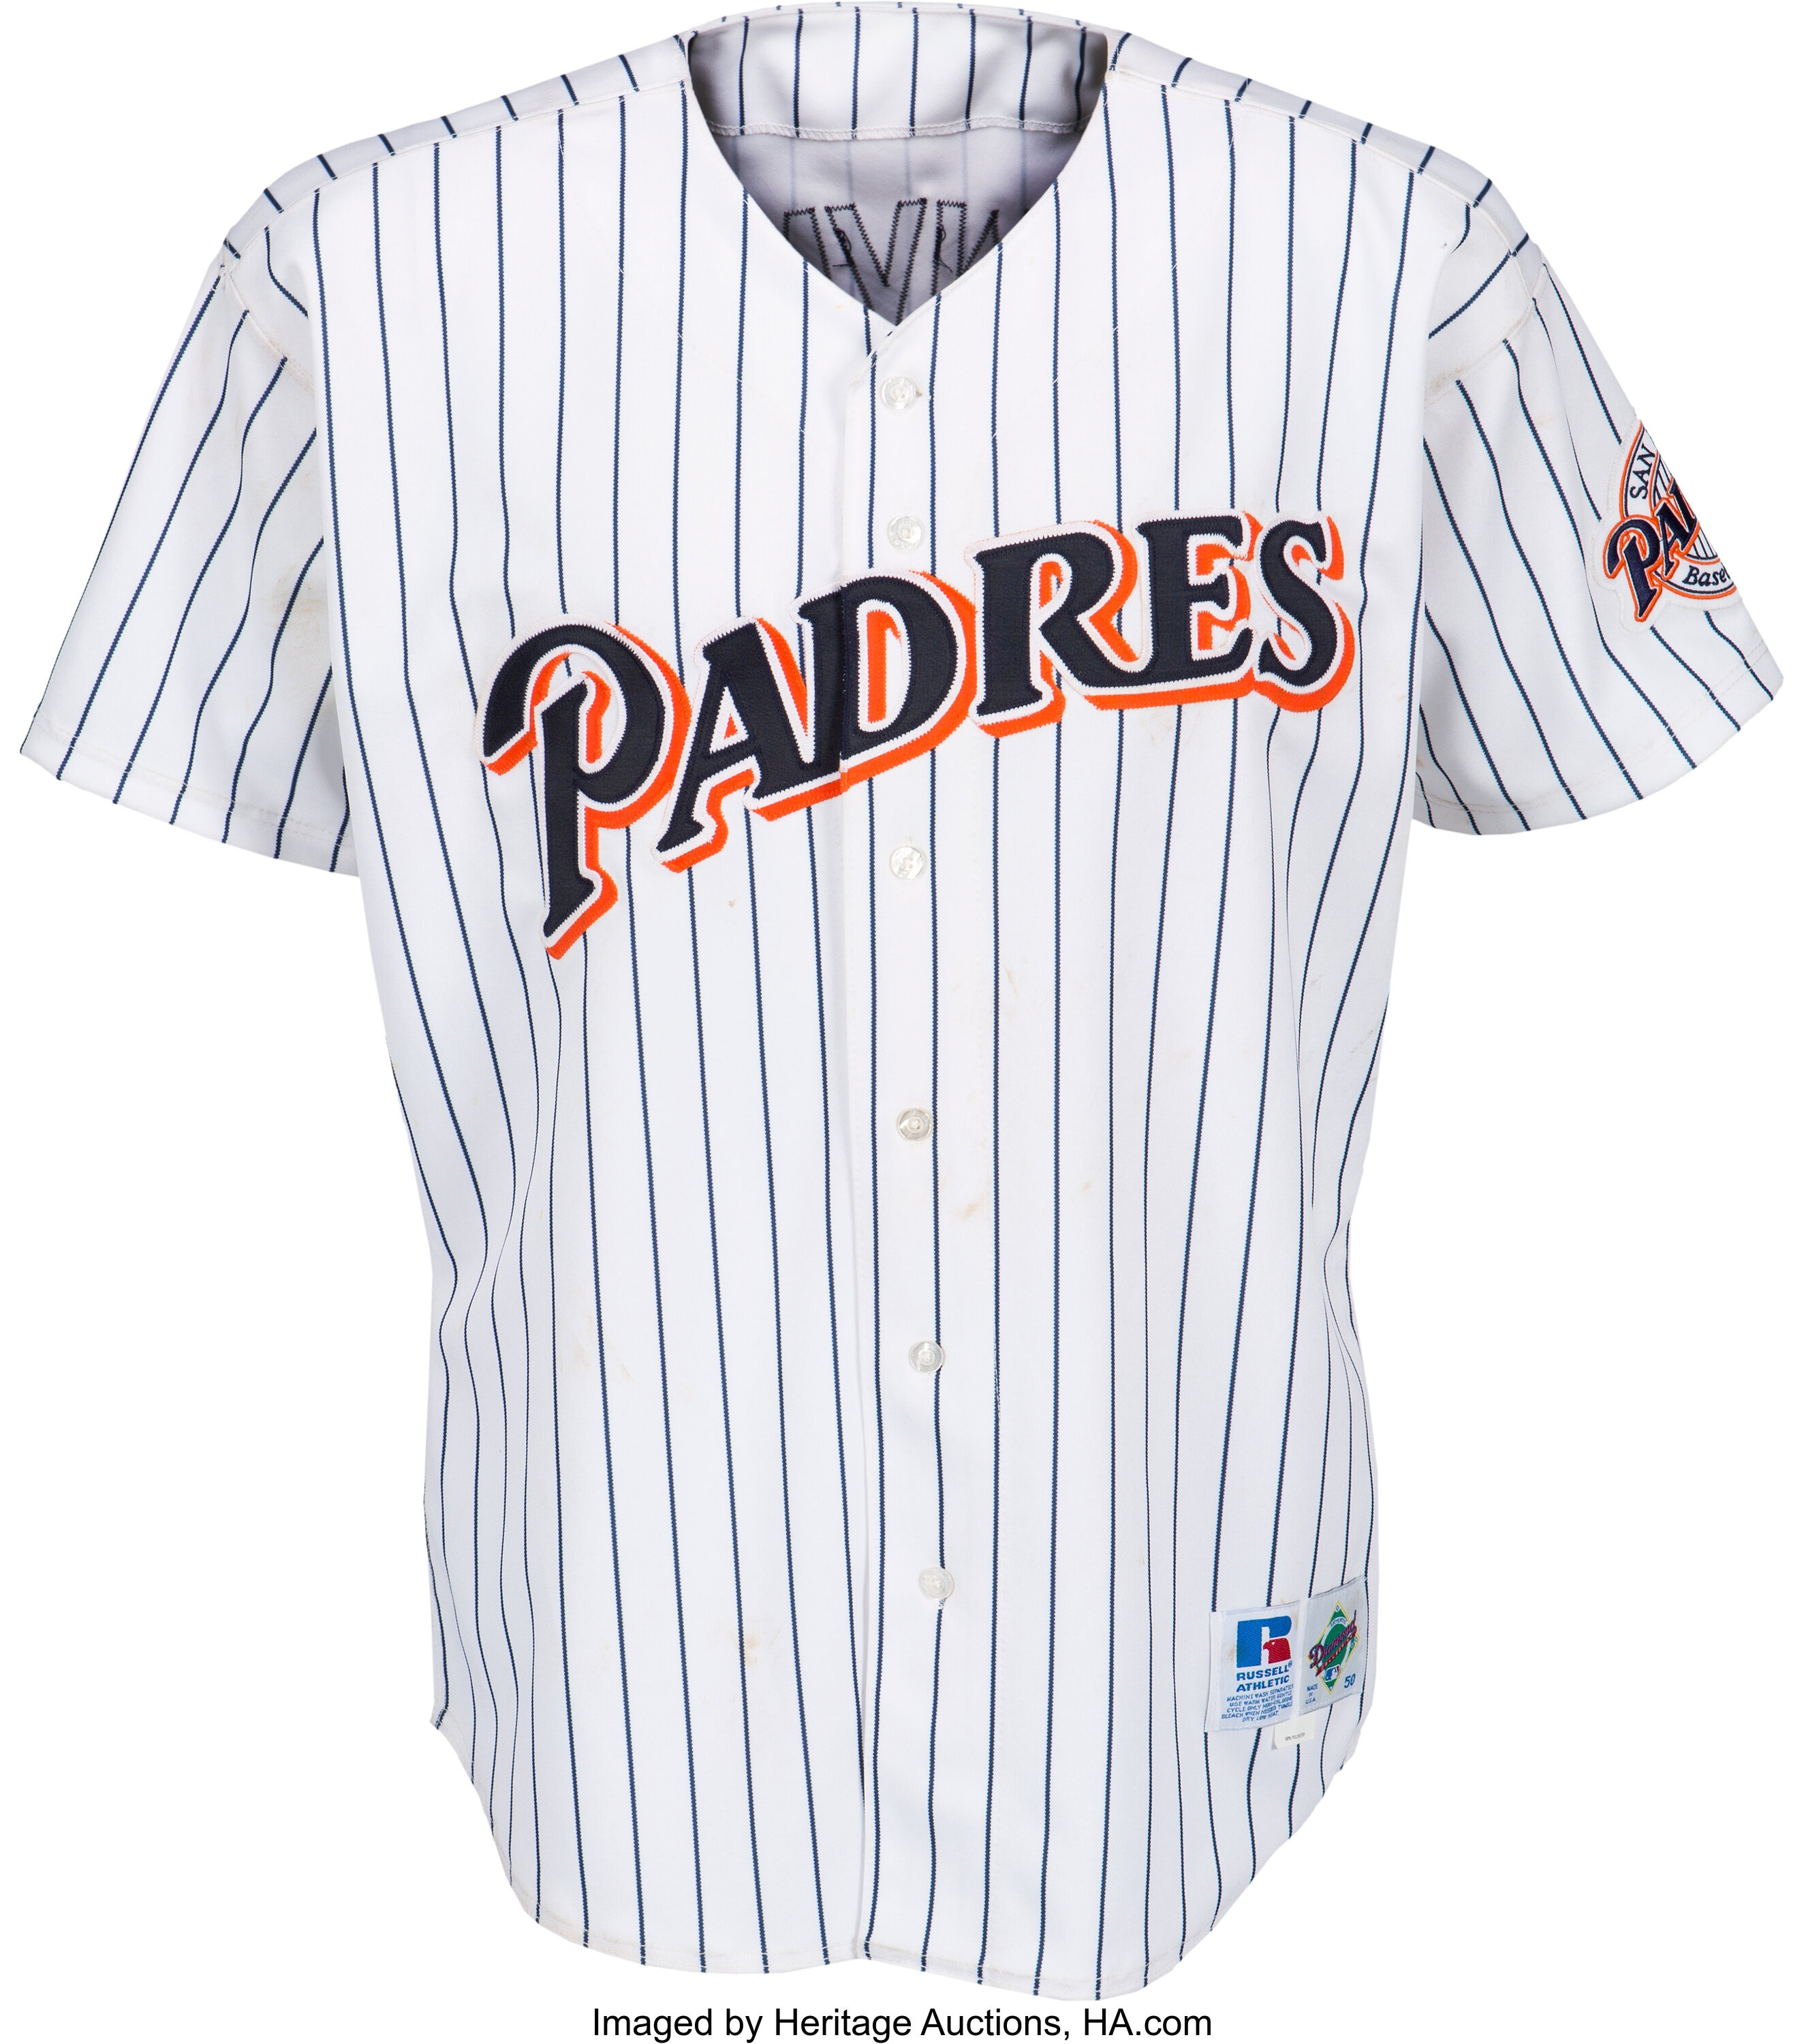 Pics: San Diego Padres in 1990s Throwback Uniforms